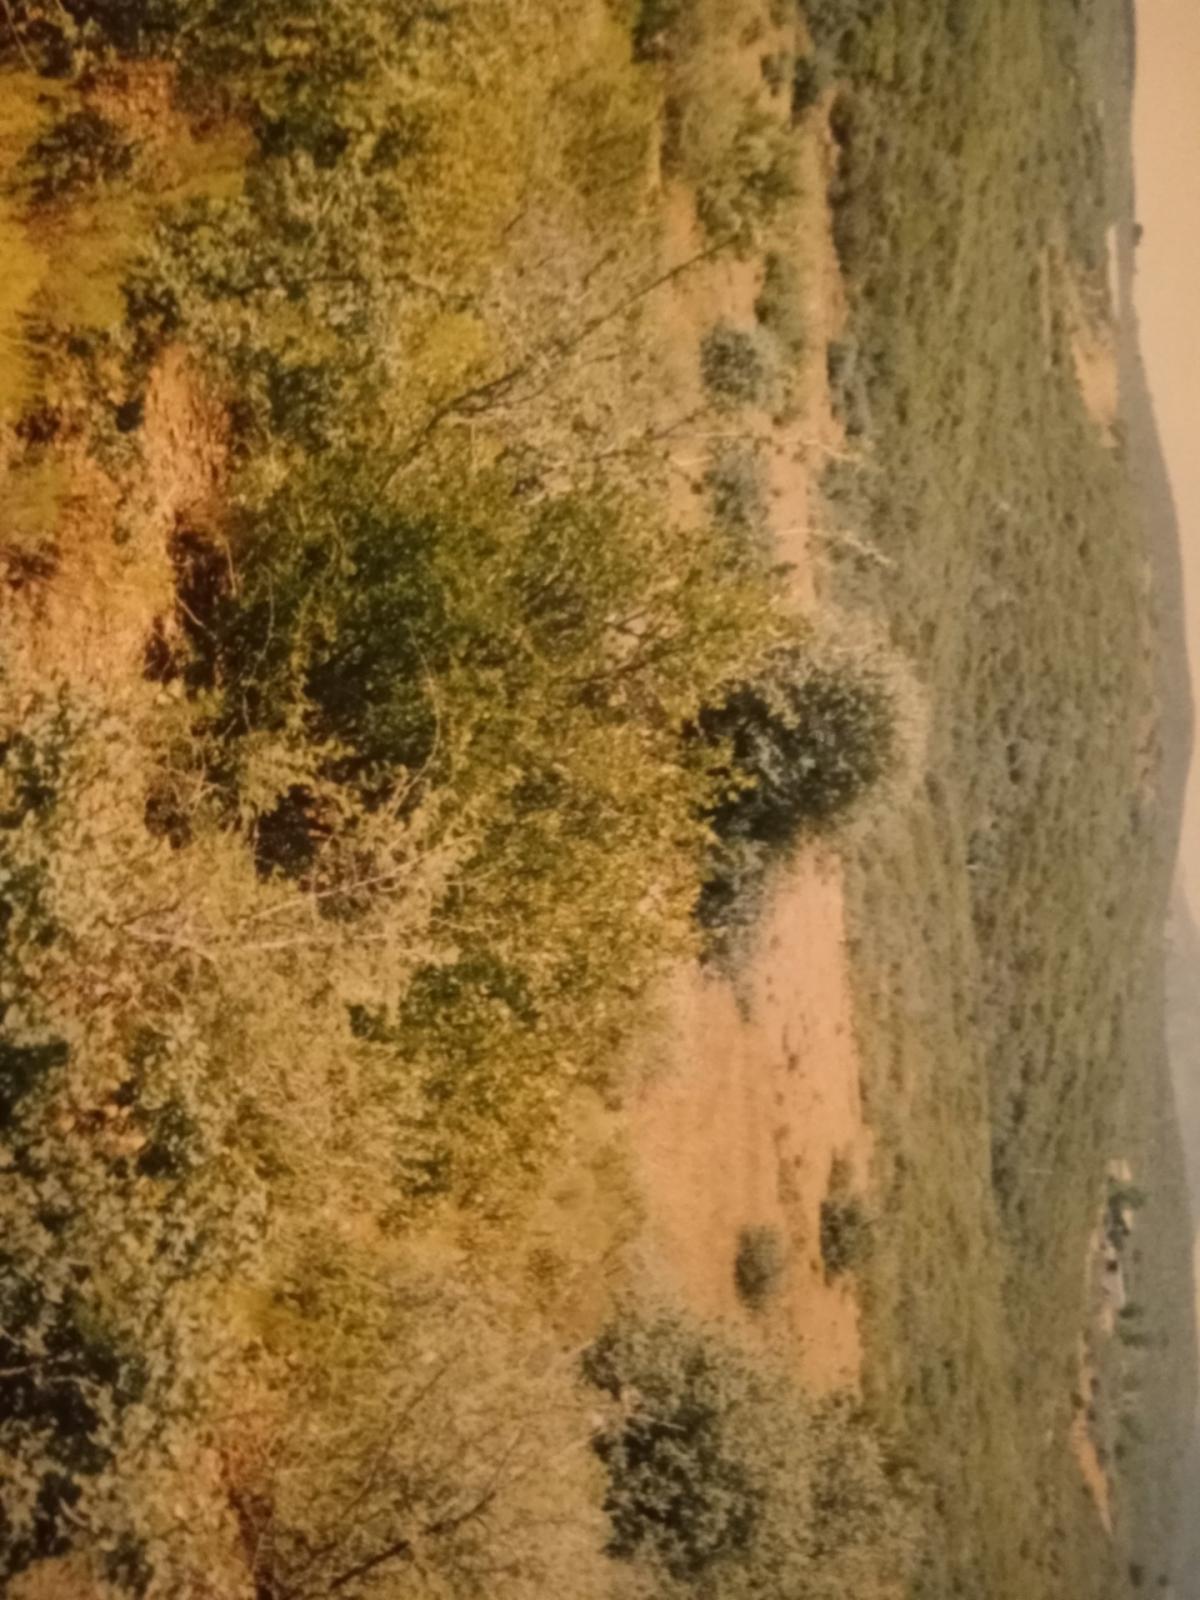 Picture of Residential Land For Sale in Mayer, Arizona, United States